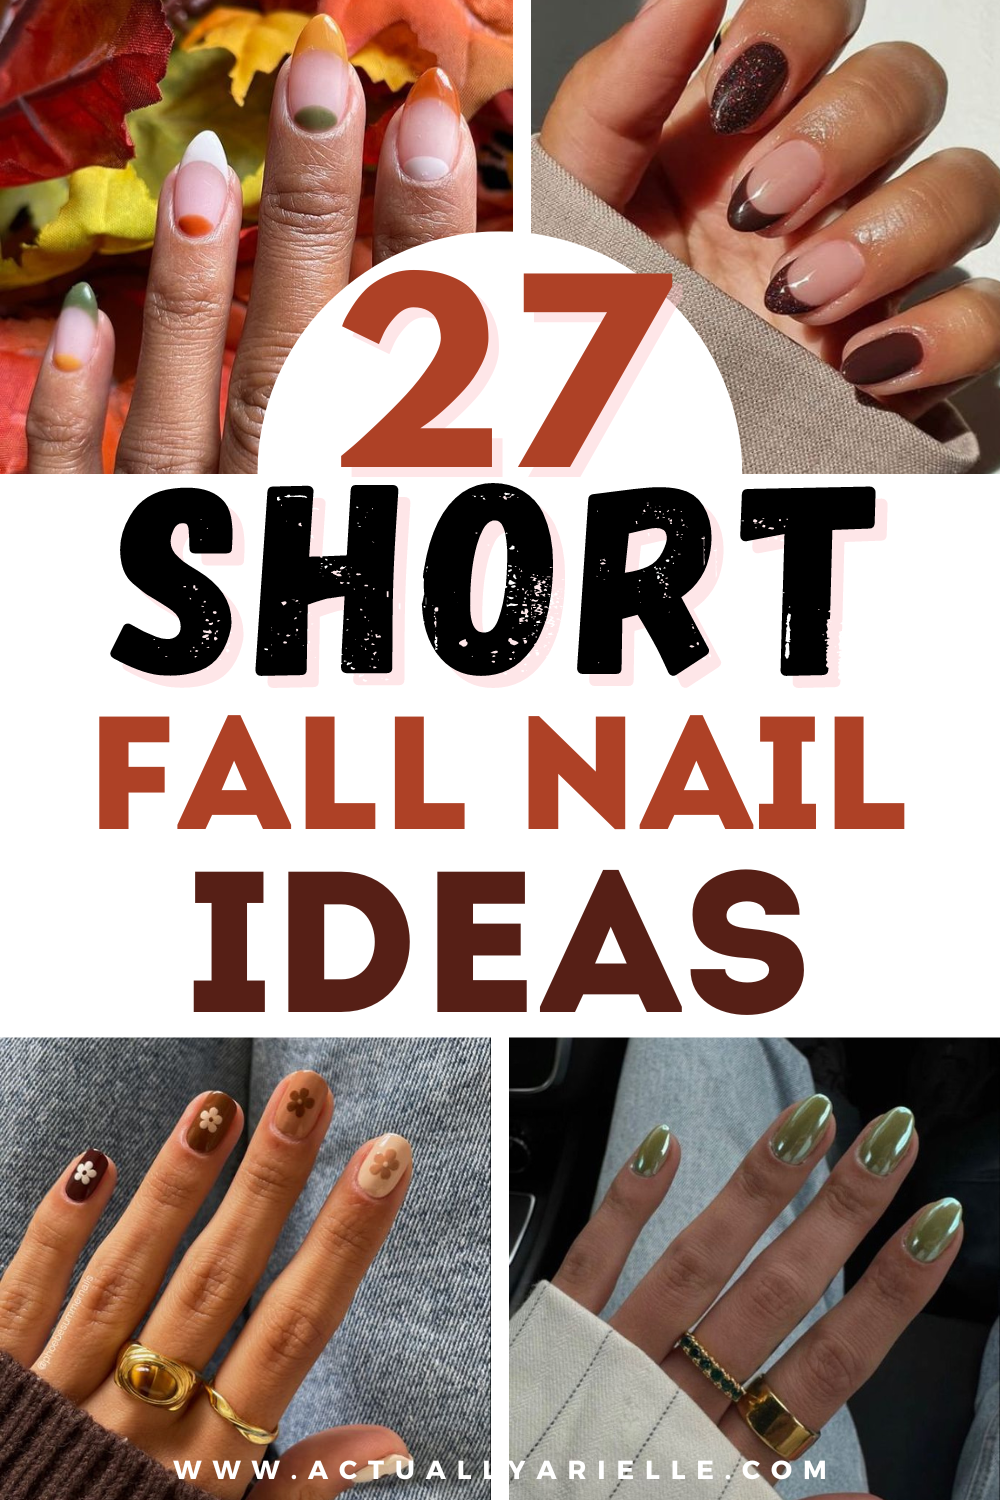 101 Nail Art Inspos for Girls Wanting to Class up Their Short Nails ...